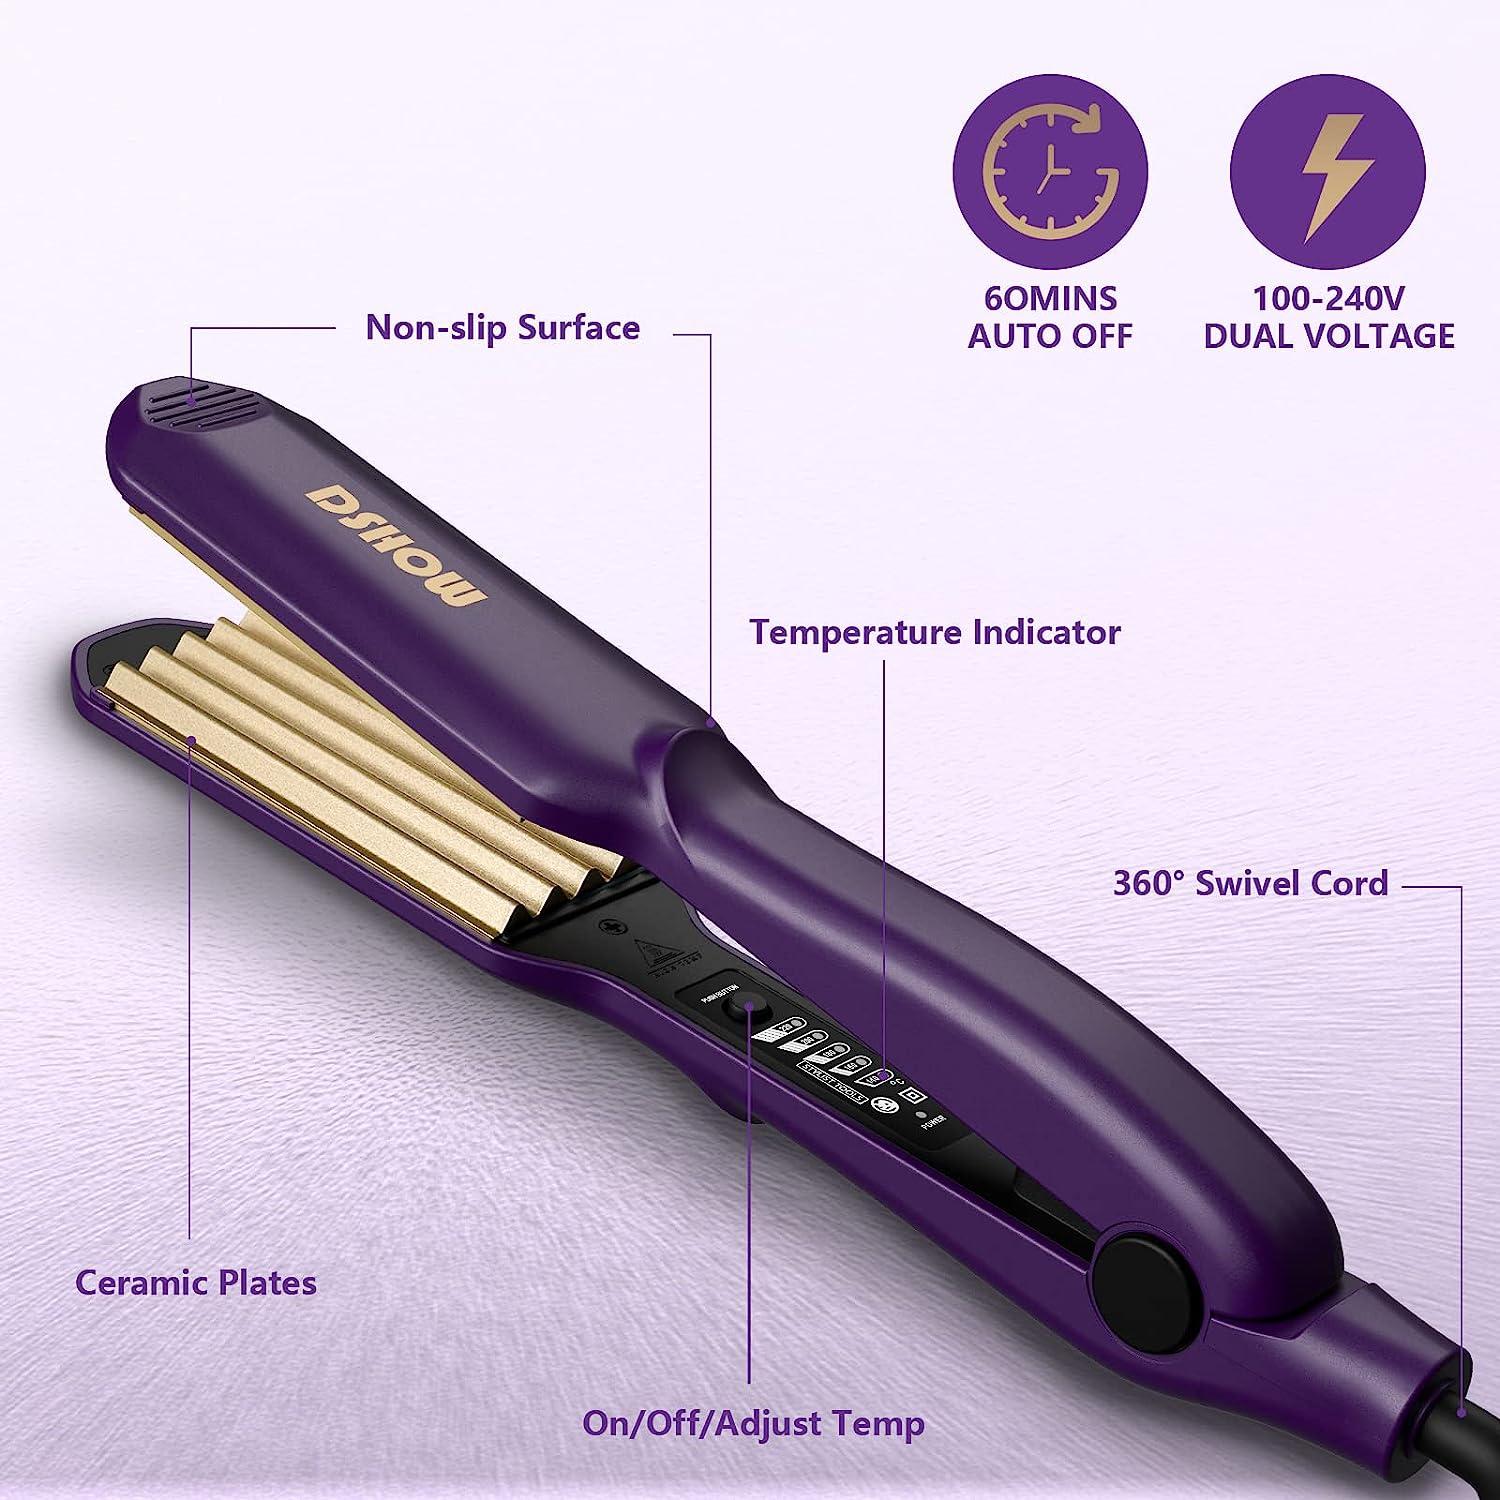 Crimping Iron Hair Crimper for Hair DSHOW Hair Waver Volumizing Crimper with Titanium Ceramic Plates Styling Tools for Women Girls (Purple)